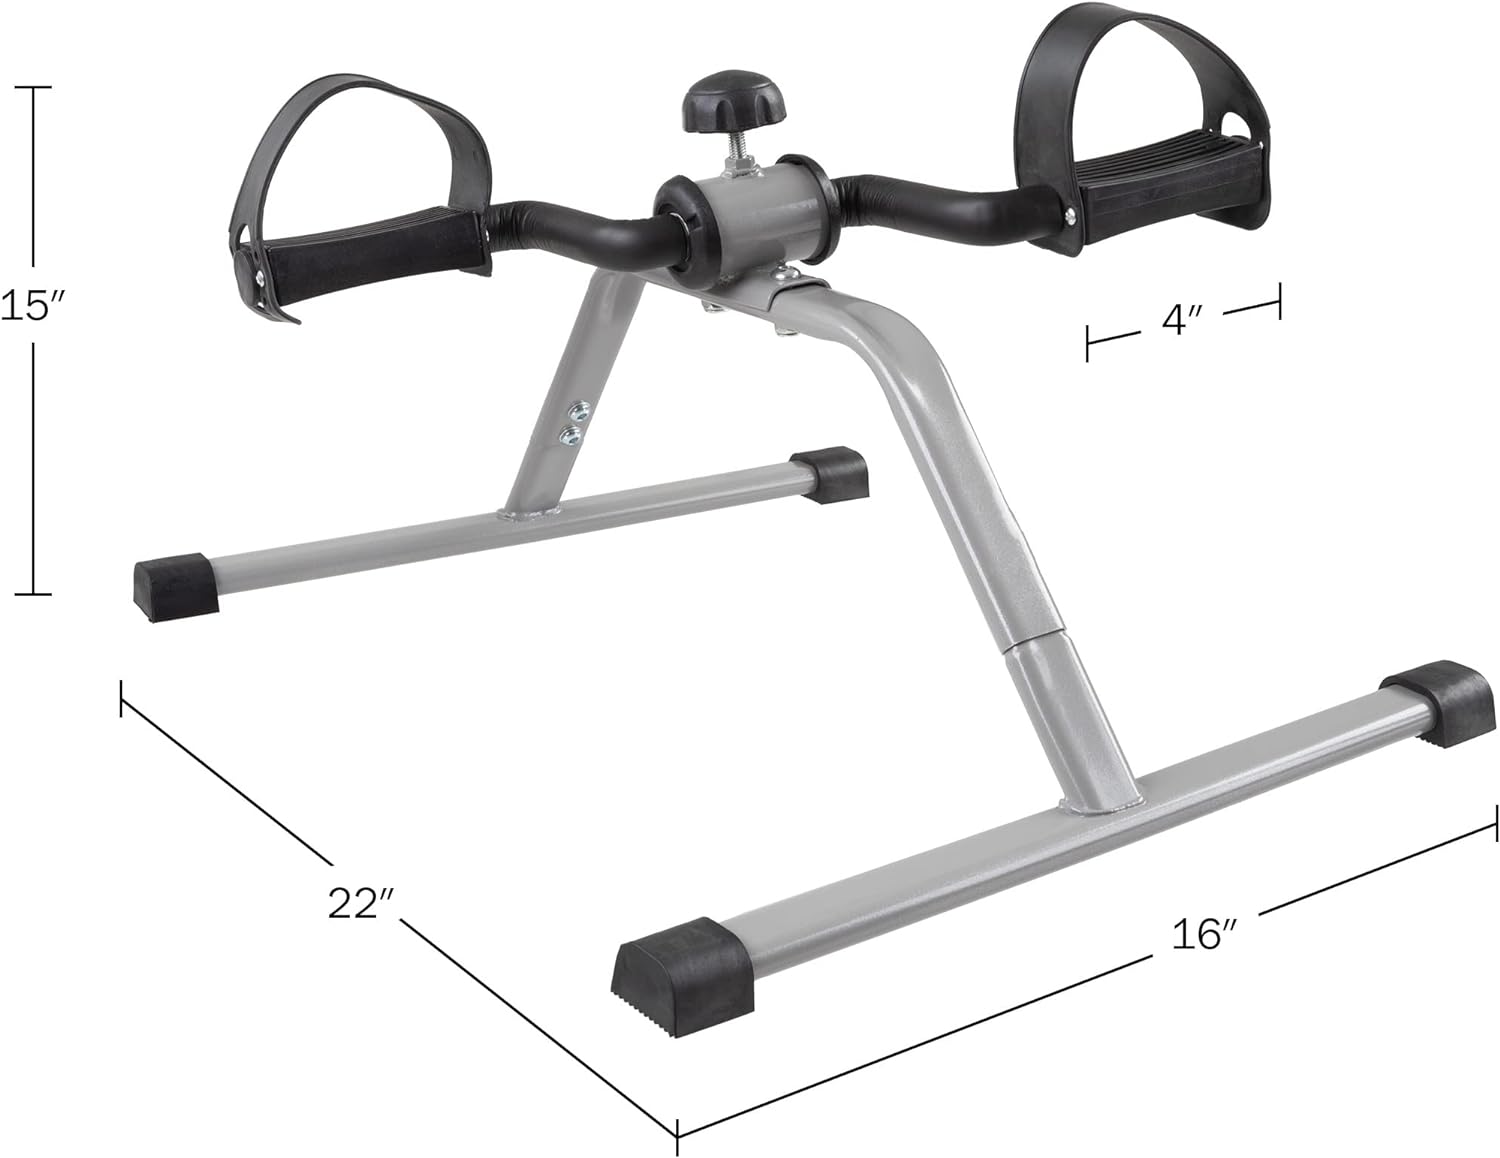 Portable Under Desk Stationary Fitness Machine Collection - Indoor Exercise Pedal Machine Bike for Arms, Legs, Physical Therapy or Calorie Burn by Wakeman Fitness